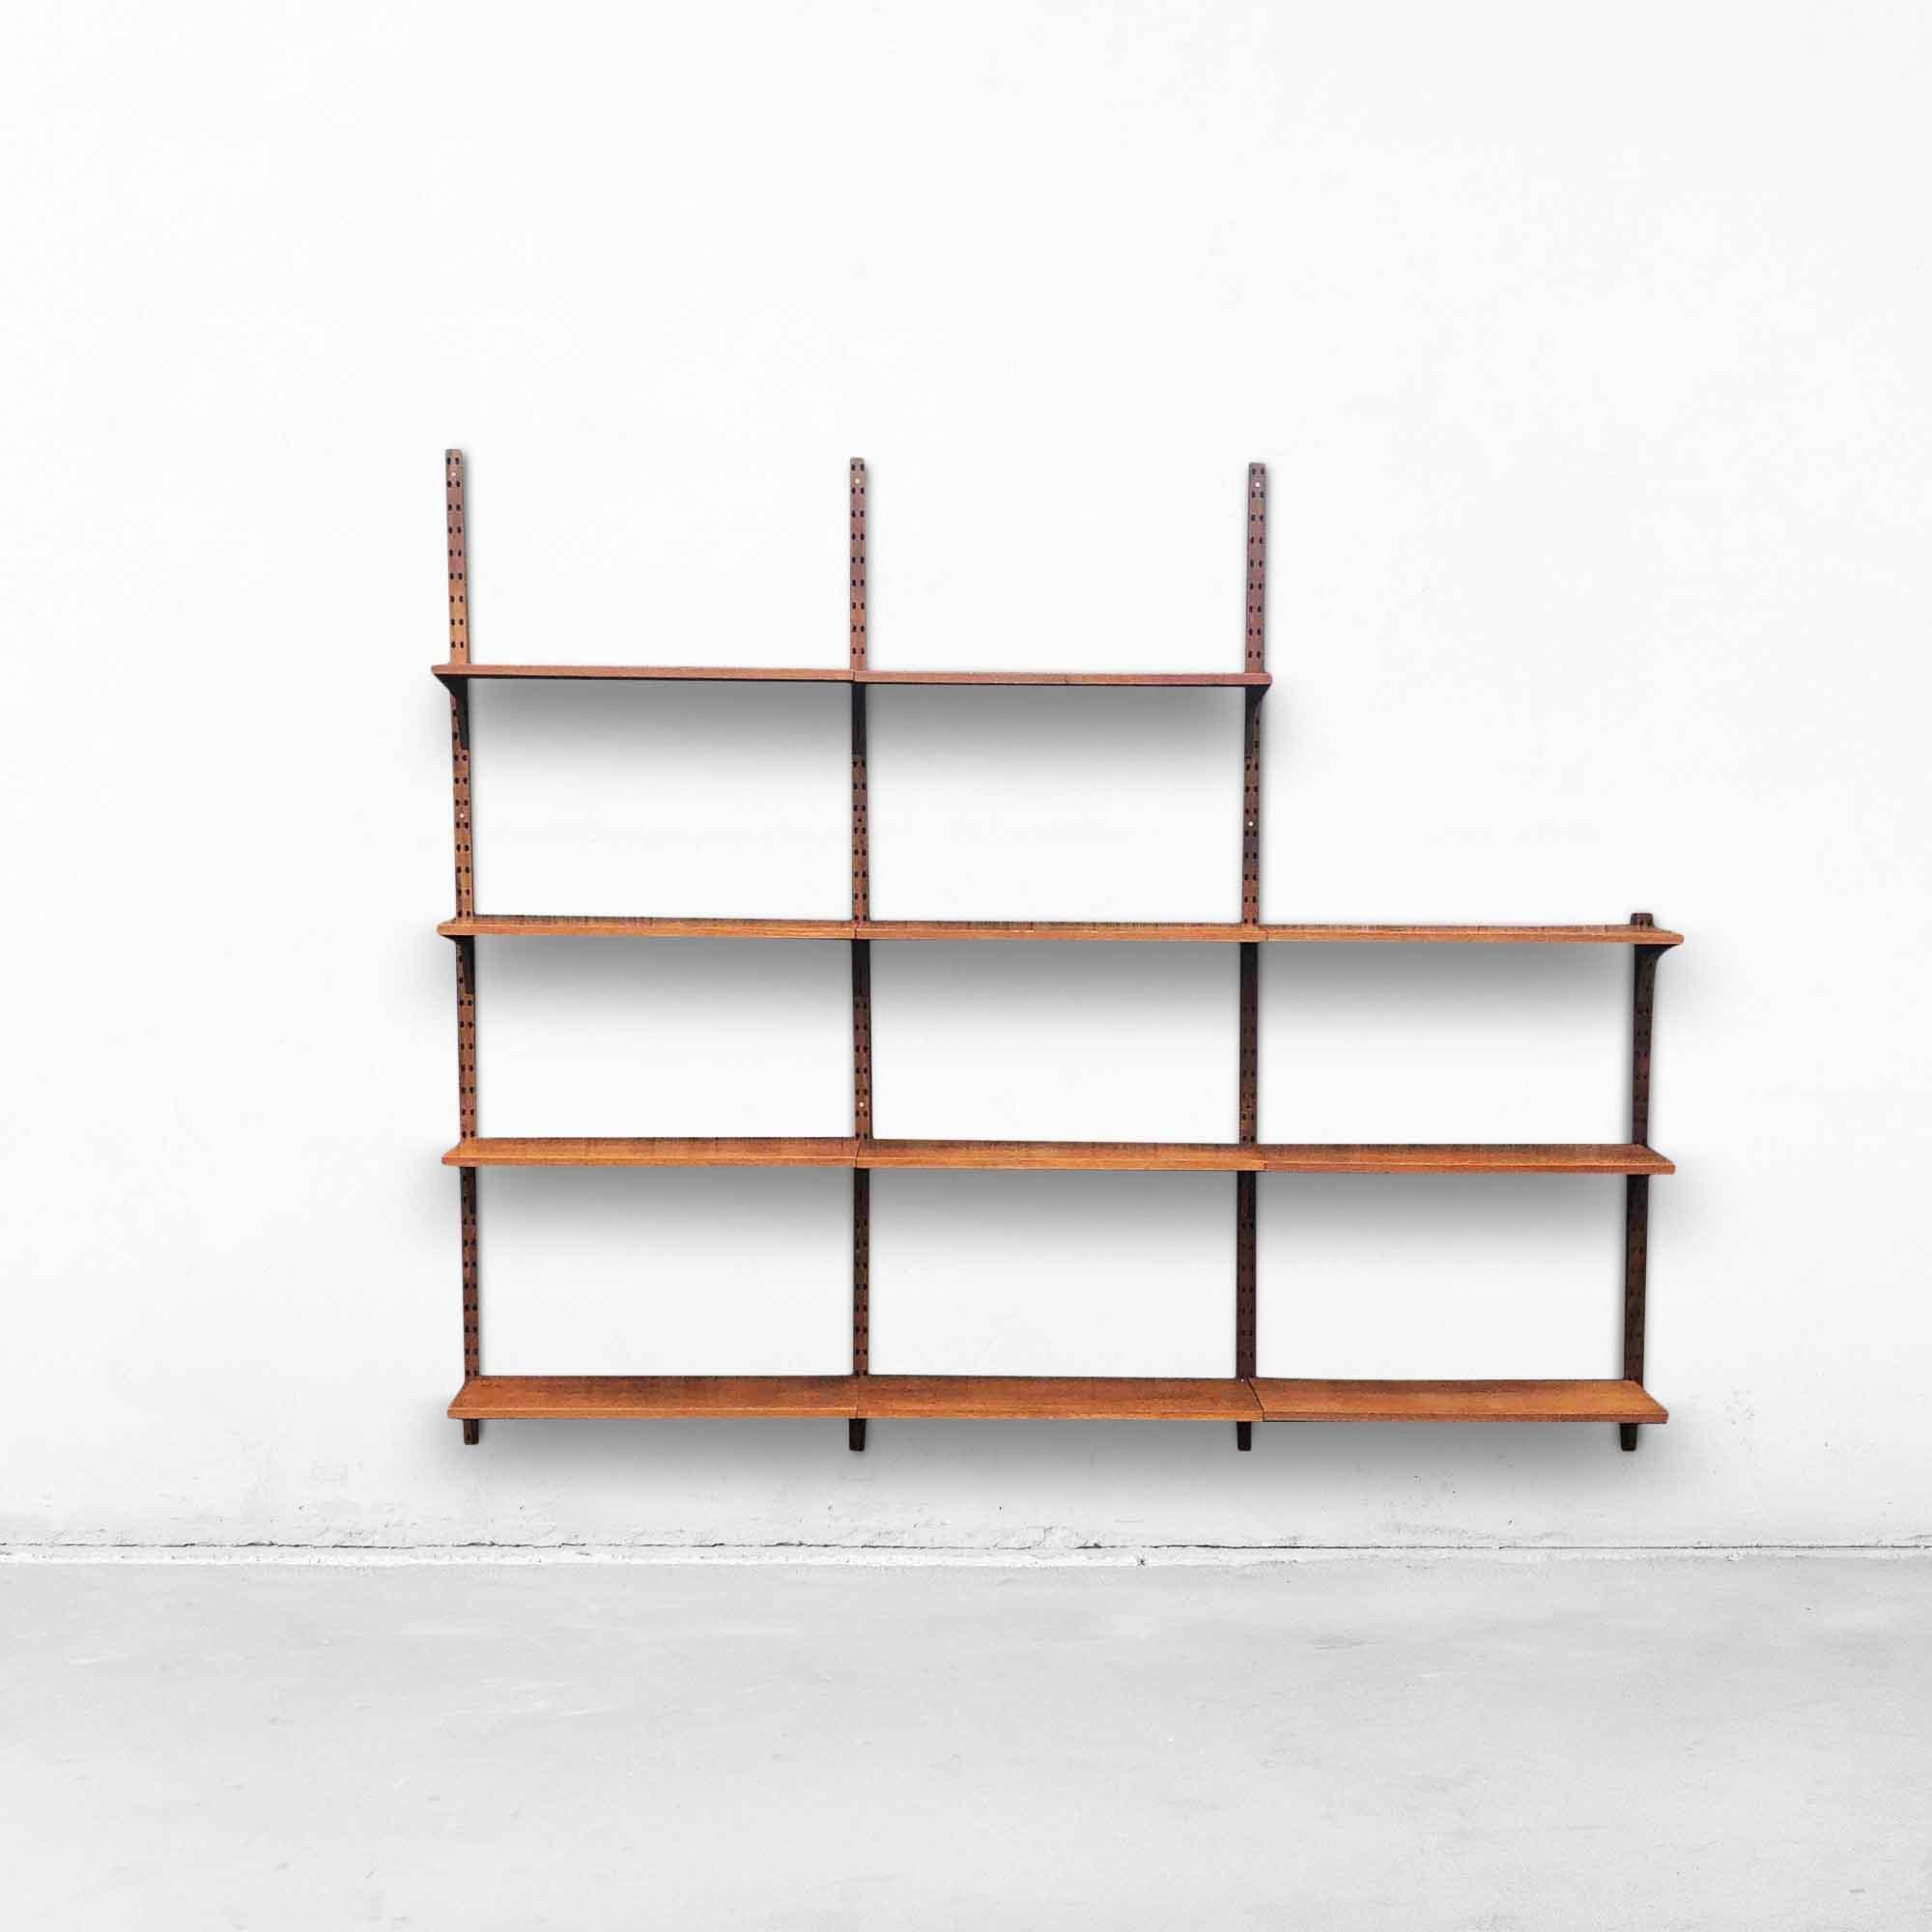 Modular wall system by Danish designer Poul Cadovius for CADO from the 1960s. This piece of furniture is made of walnut and the planks and supports can be rearranged in various ways as desired. The wall system consists of 11 shelves, 3 high